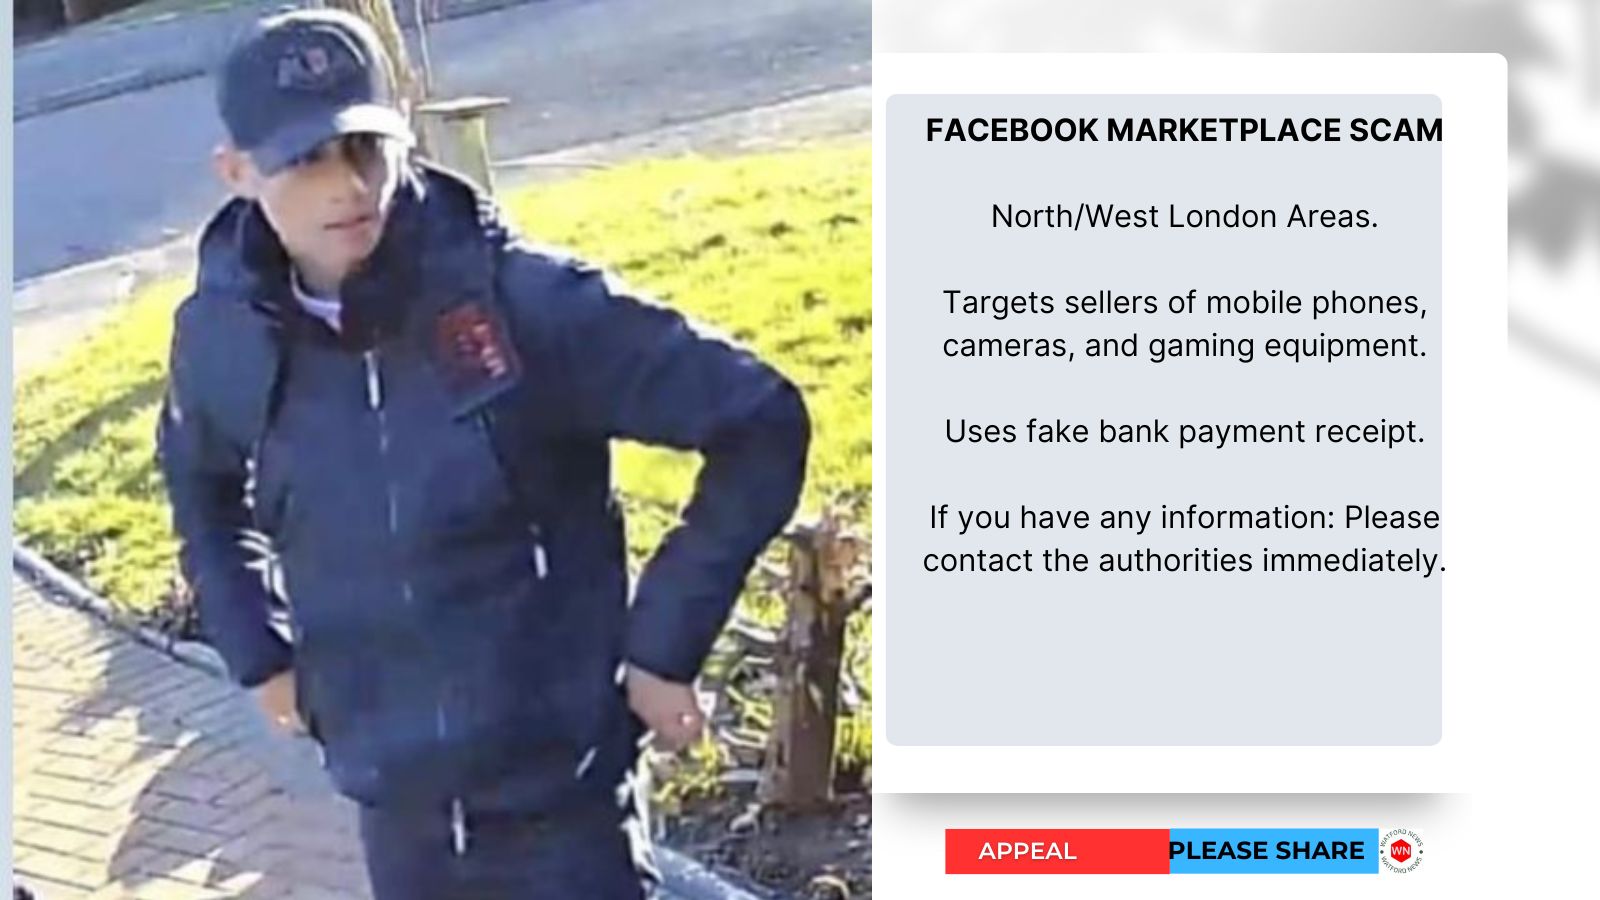 Appeal launched to Identify Wanted Facebook Marketplace Fraudster